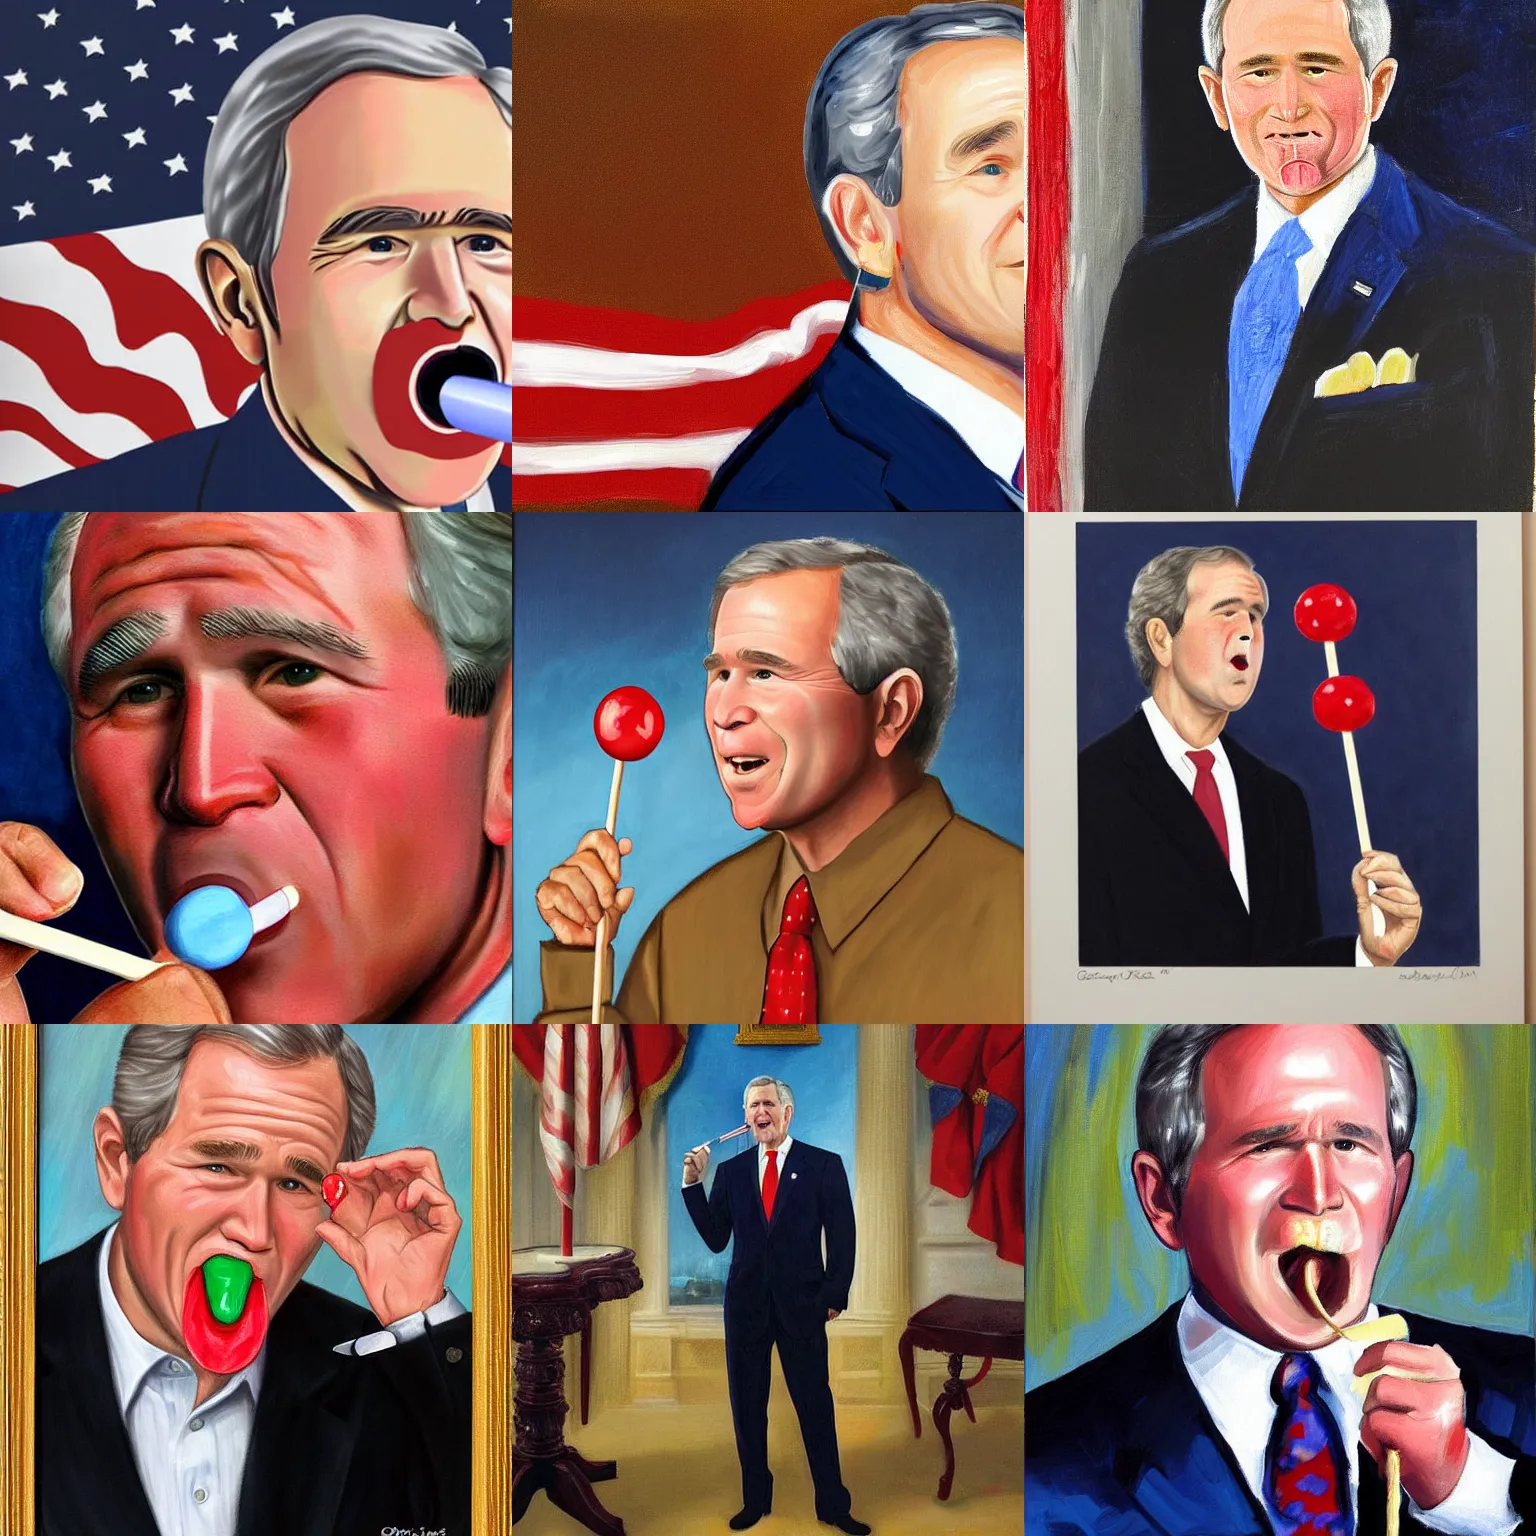 Prompt: George W. Bush licking a lollipop, official presidential portrait painting